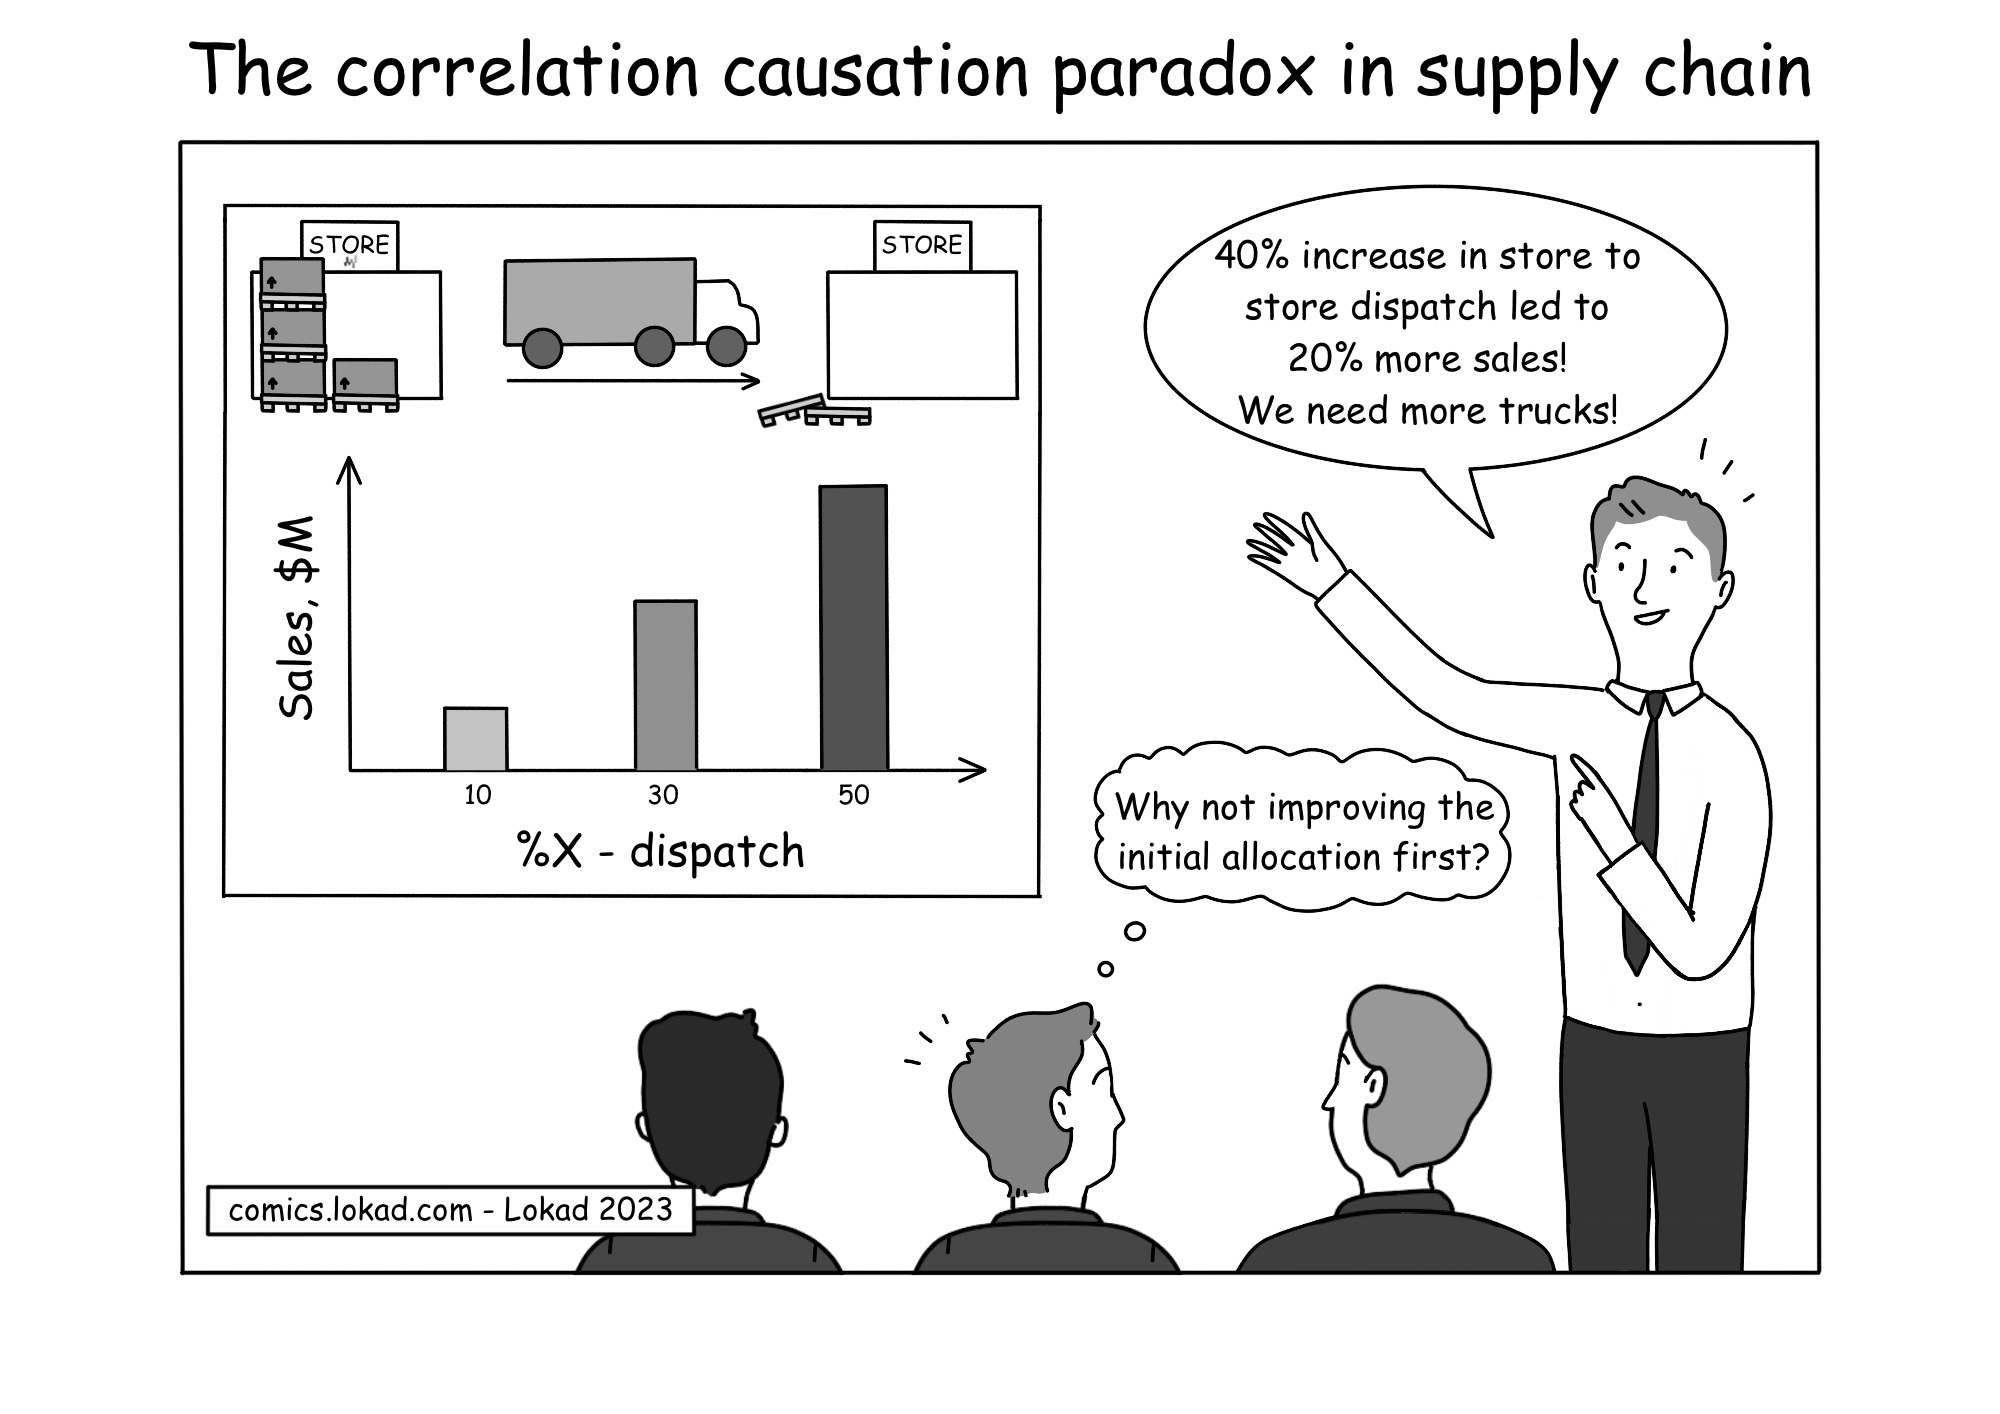 Comic from Lokad's supply chain series, titled 'The correlation causation paradox in supply chain', shows a meeting room where a presenter excitedly correlates a 40% increase in store-to-store dispatch with a 20% rise in sales, concluding they need more trucks for cross-dispatch between stores. A thought bubble from one of the audience members suggests improving the initial allocation first, illustrating the confusion between correlation and causation in decision-making.